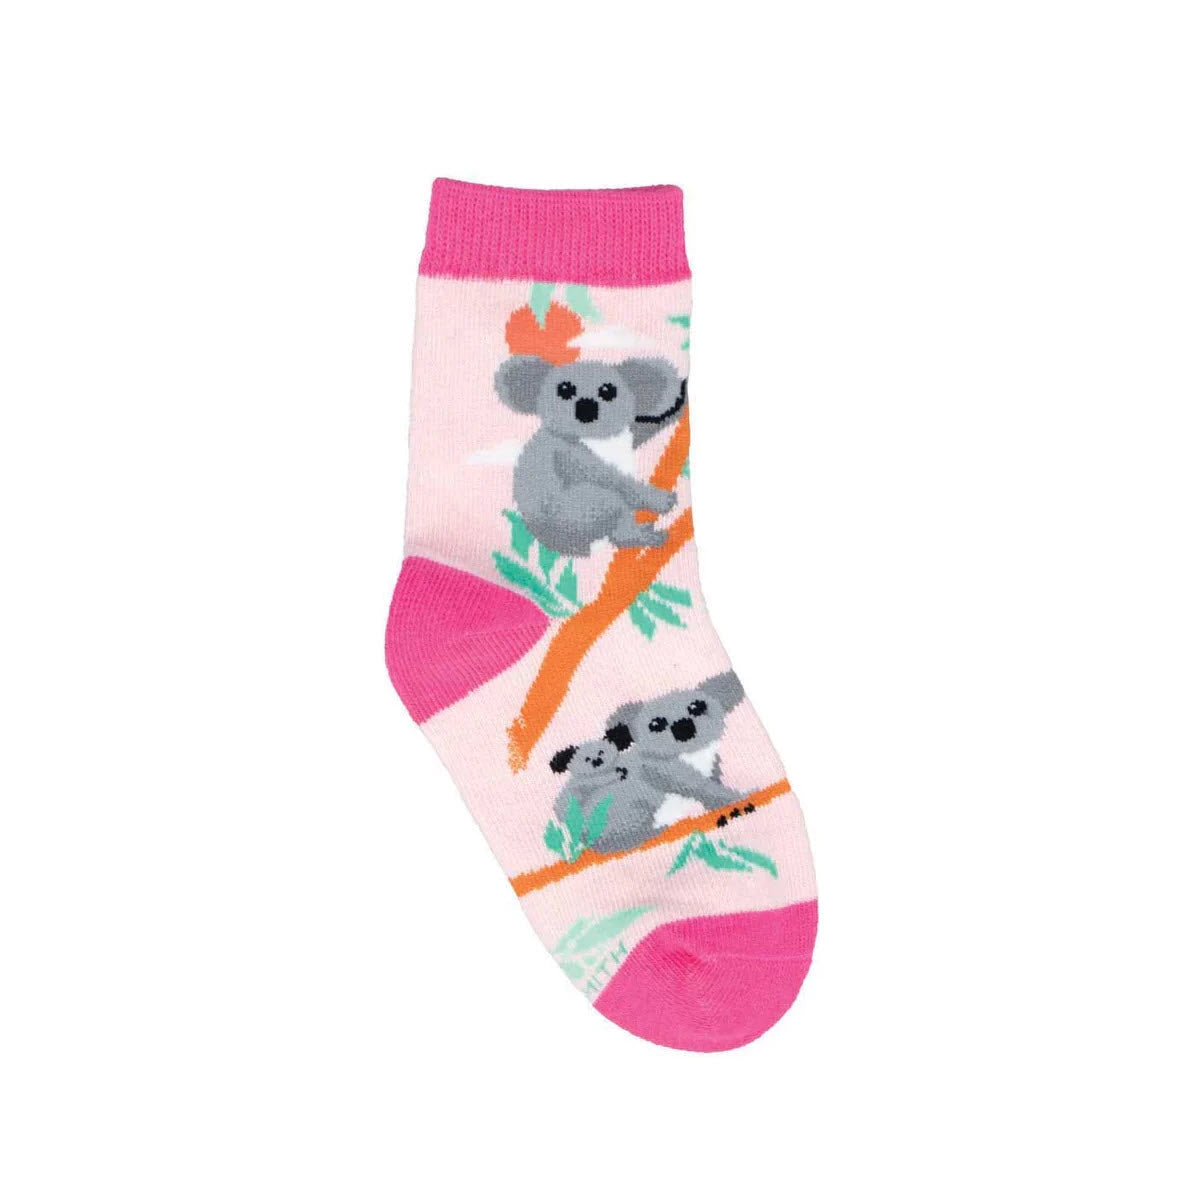 A youth size SOCKSMITH CUTE KOALAS CREW SOCKS PINK - KIDS featuring a pattern of koala joeys on branches, with pink toe and top cuff details, isolated on a white background.